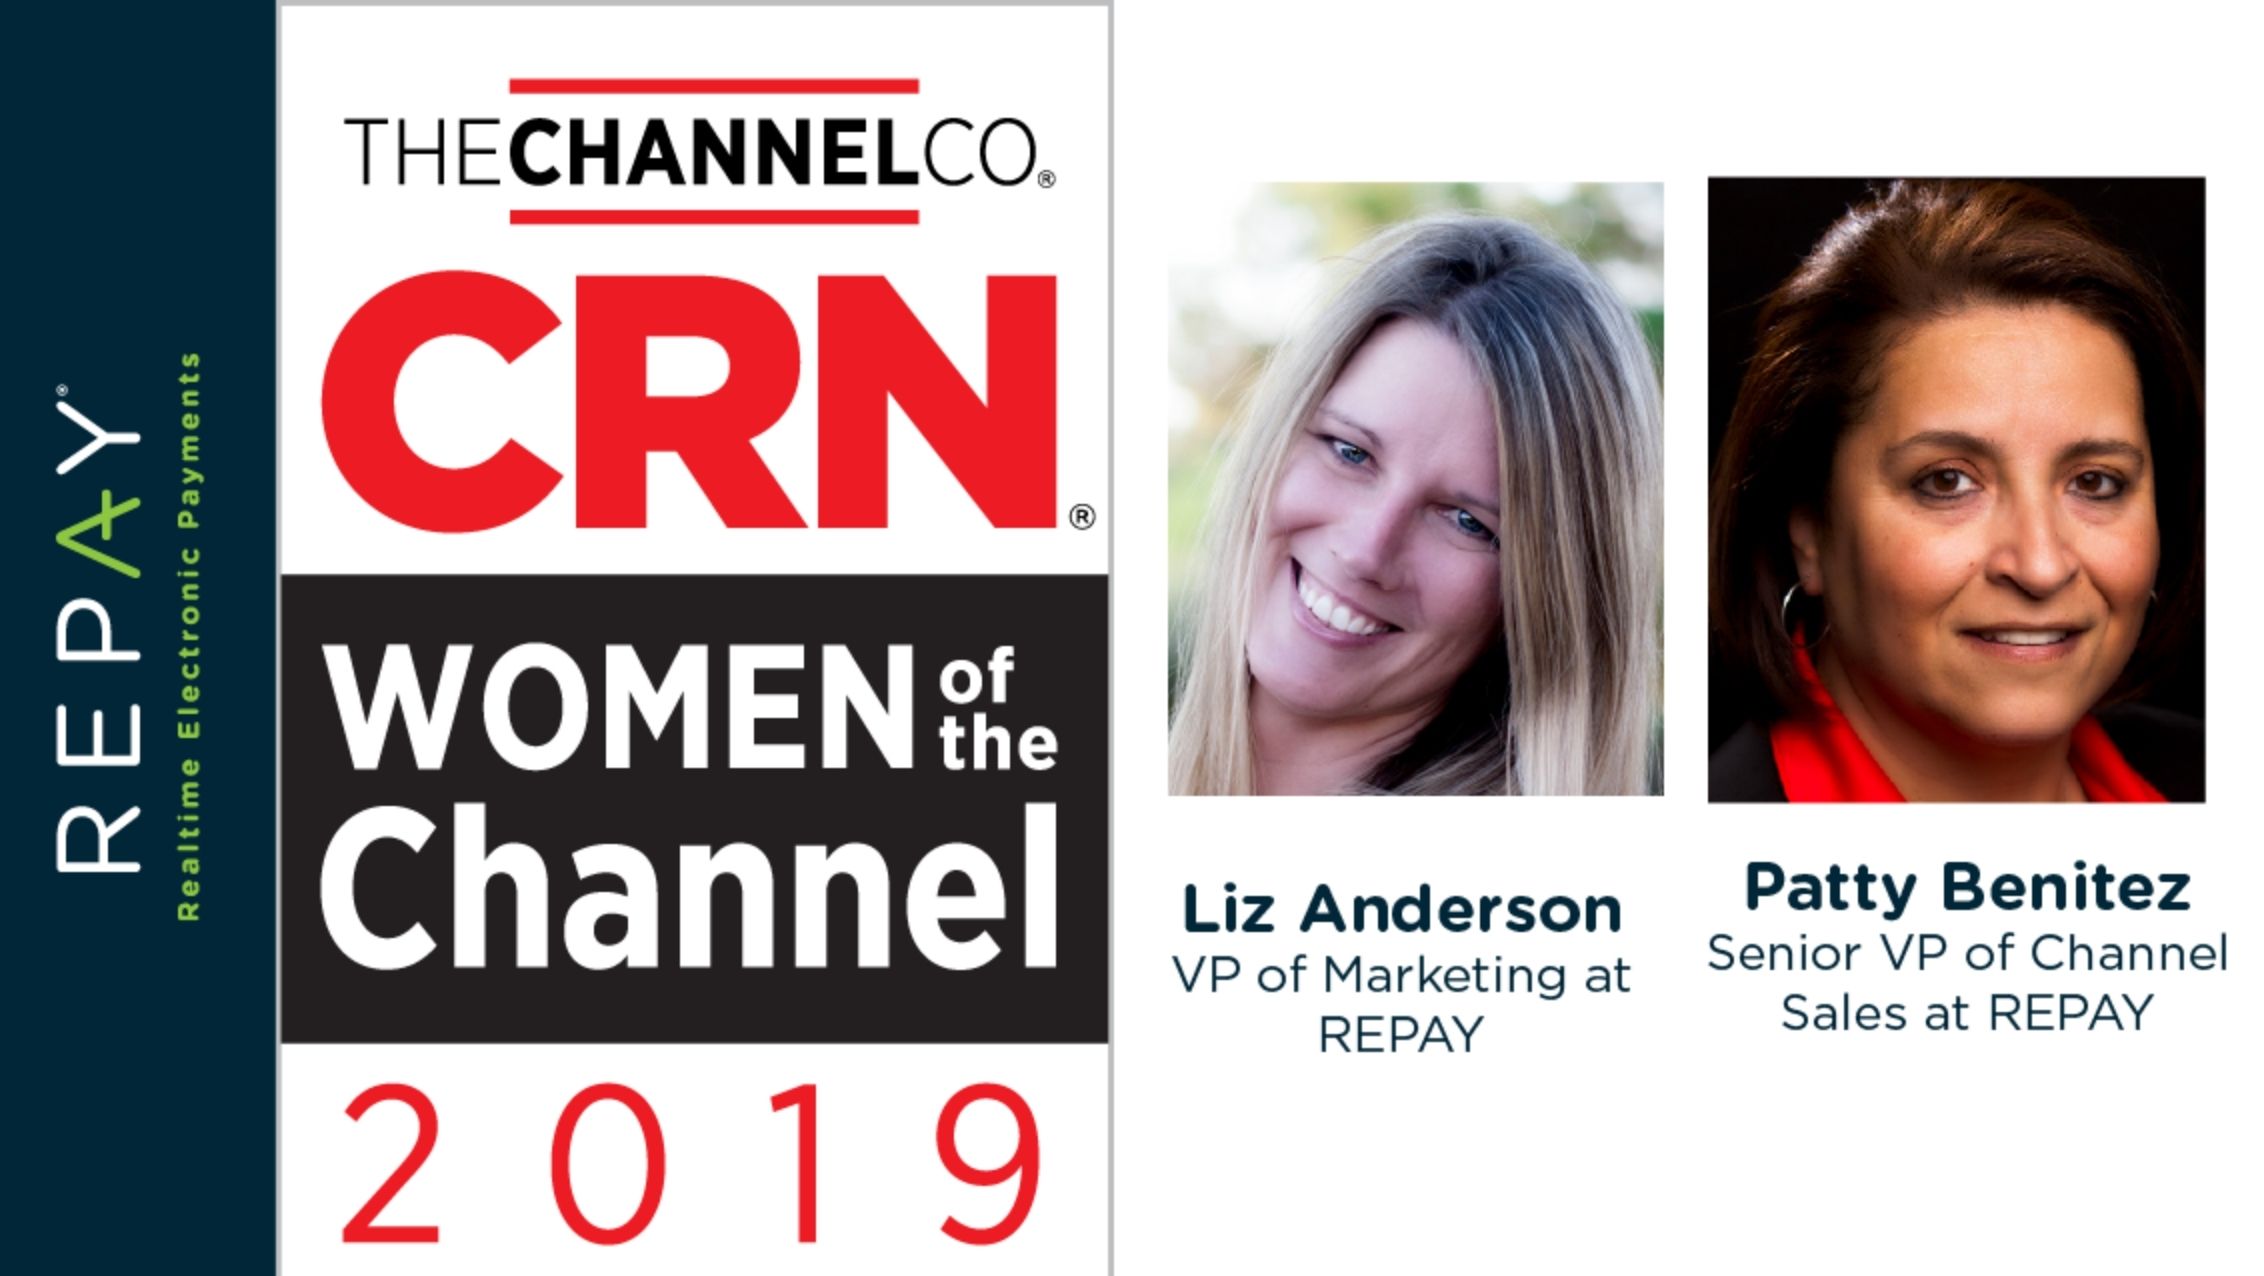 CRN Honors Two REPAY Executives with 2019 Women of the Channel Award